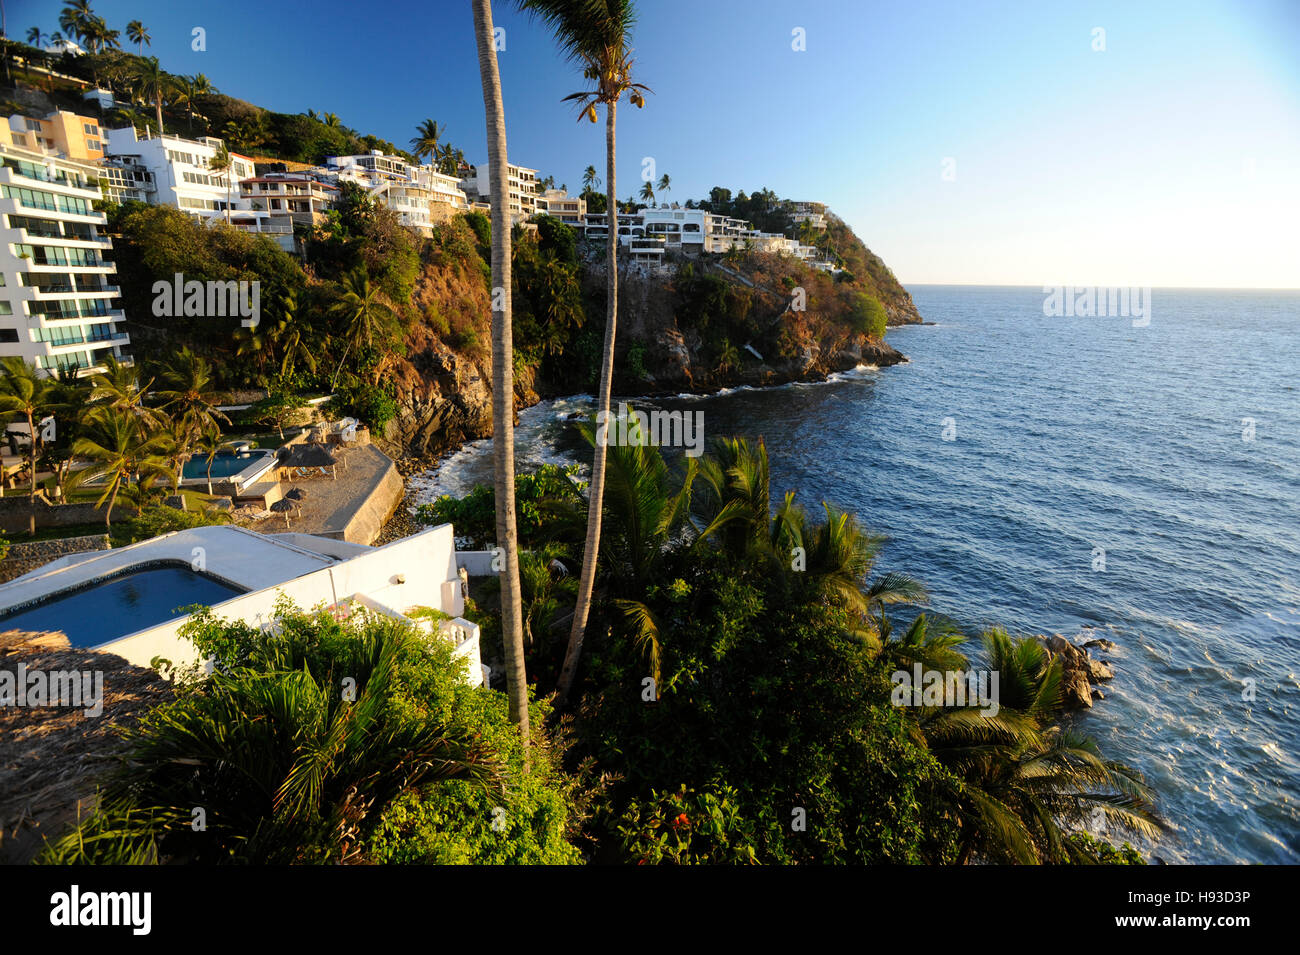 Coastal homes and apartments on cliffs above Pacific Ocean in Acapulco, Mexico. Property released. Stock Photo